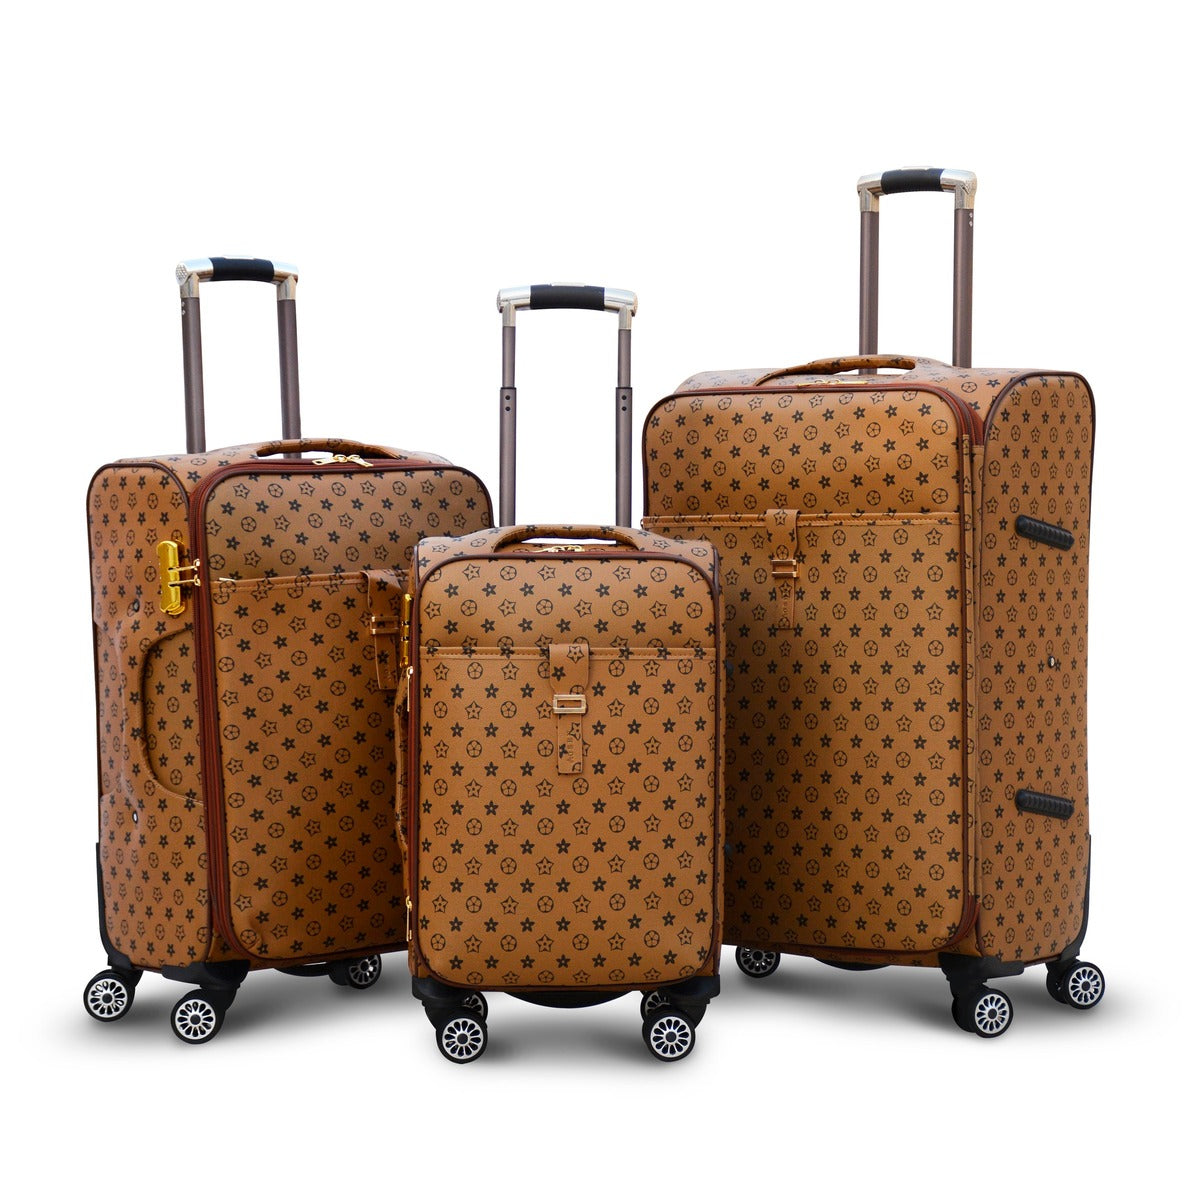 3 Piece Full Set 20" 24" 28 Inches Light Brown Colour LVR PU Leather Luggage Lightweight Soft Material Trolley Bag with Spinner wheel Zaappy.com